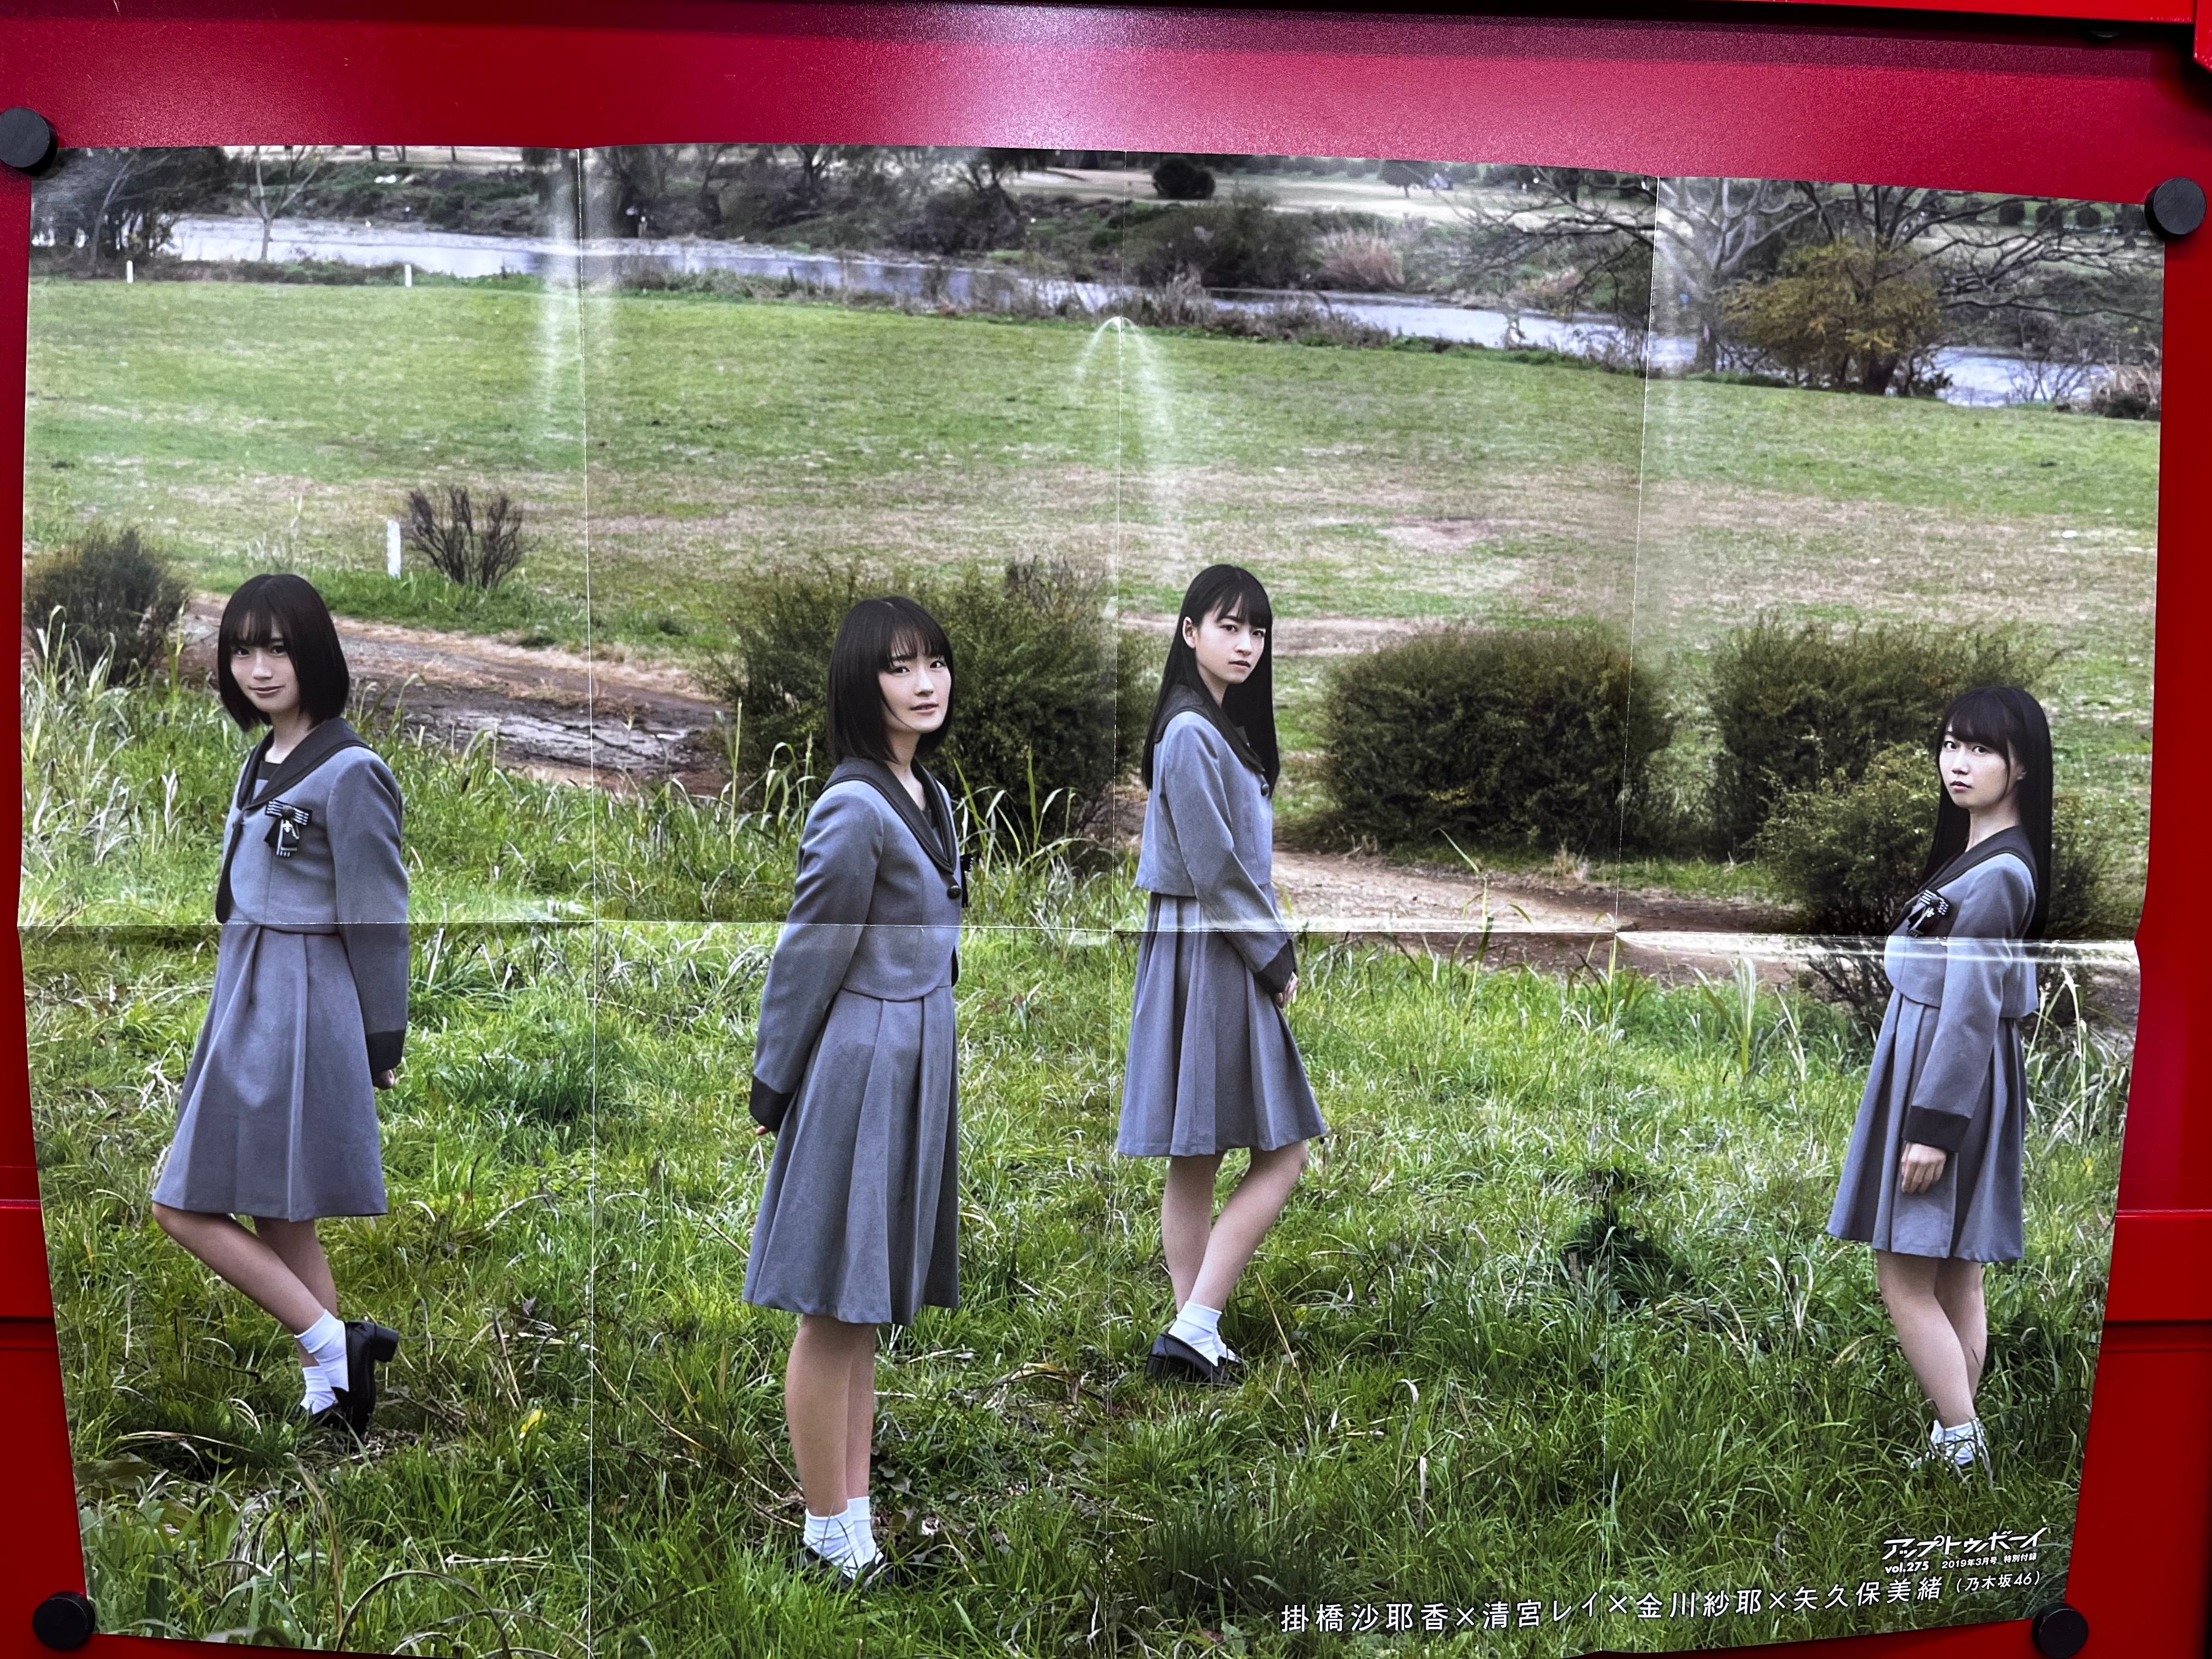 Nogizaka　To　Online　poster　vol.275　Boy　2019　Mandarake　46　Supplement　Special　Shop　Meeting　March　Up　Edition